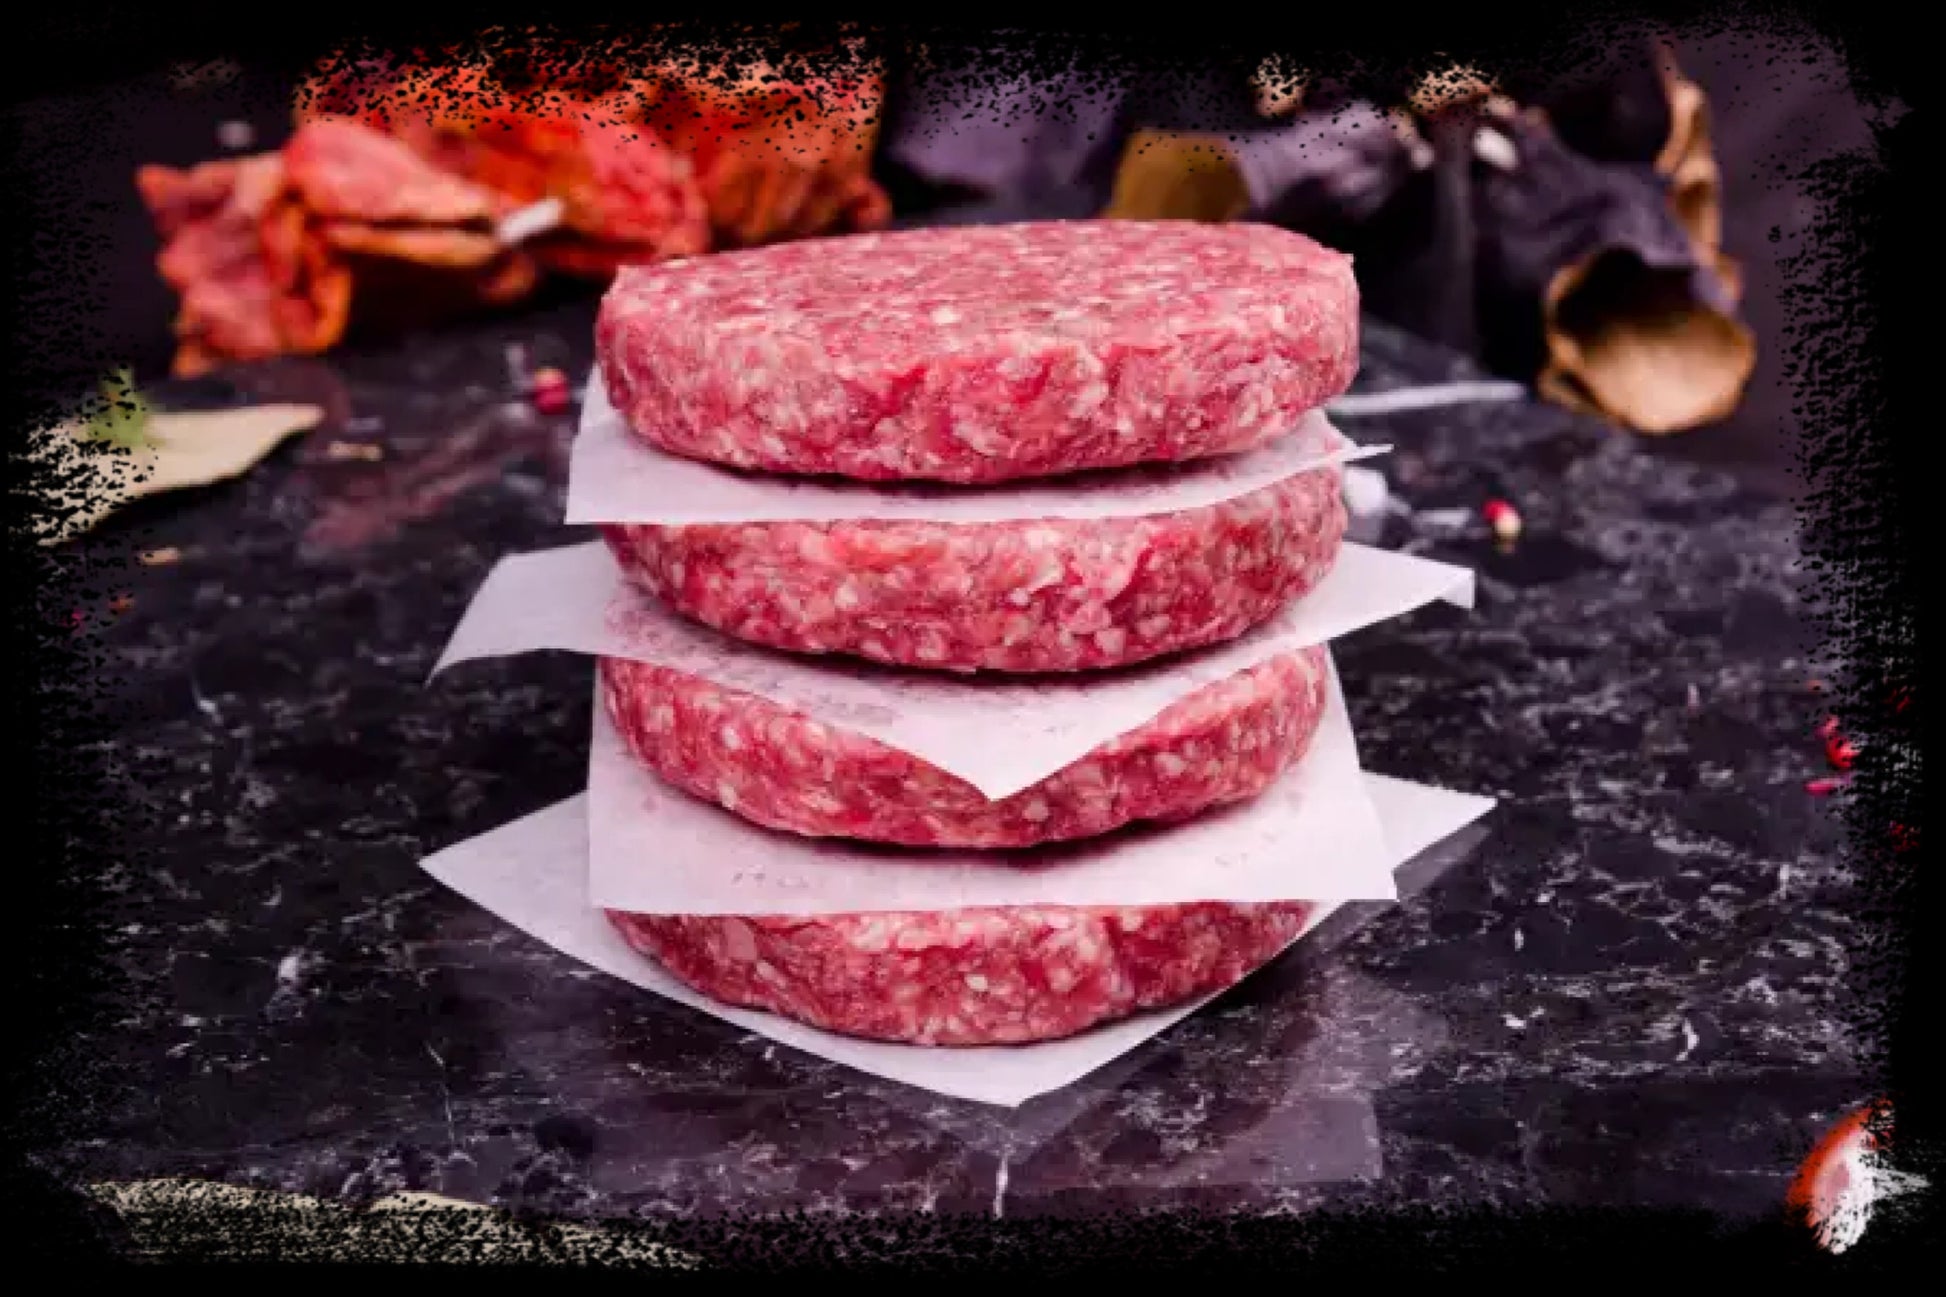 Grass-Fed Beef Burger, Australia (Dhs 51.90/kg)- Chilled